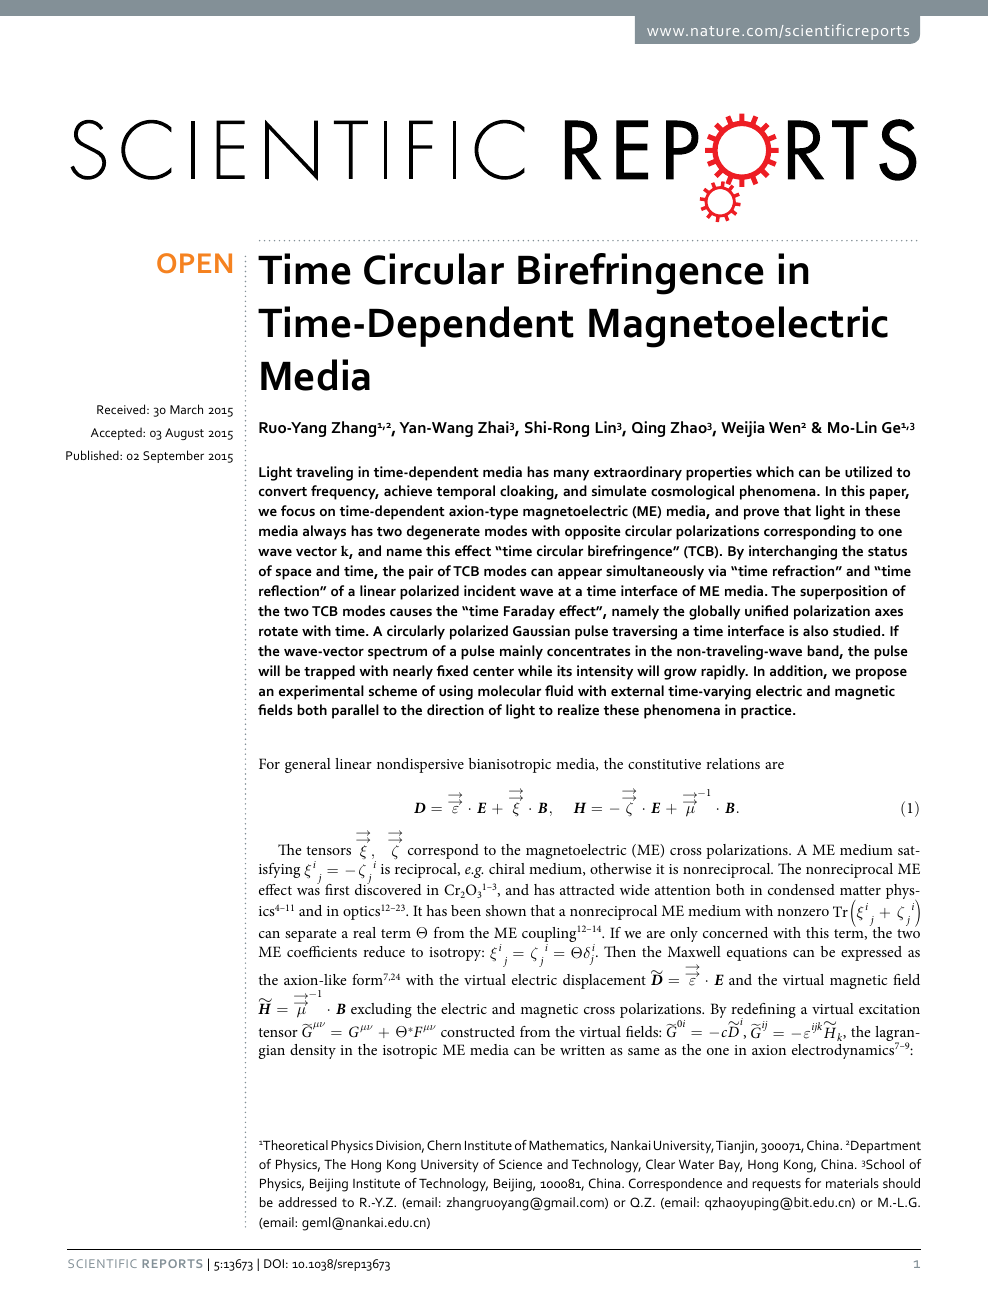 Time Circular Birefringence In Time Dependent Magnetoelectric Media Topic Of Research Paper In Physical Sciences Download Scholarly Article Pdf And Read For Free On Cyberleninka Open Science Hub